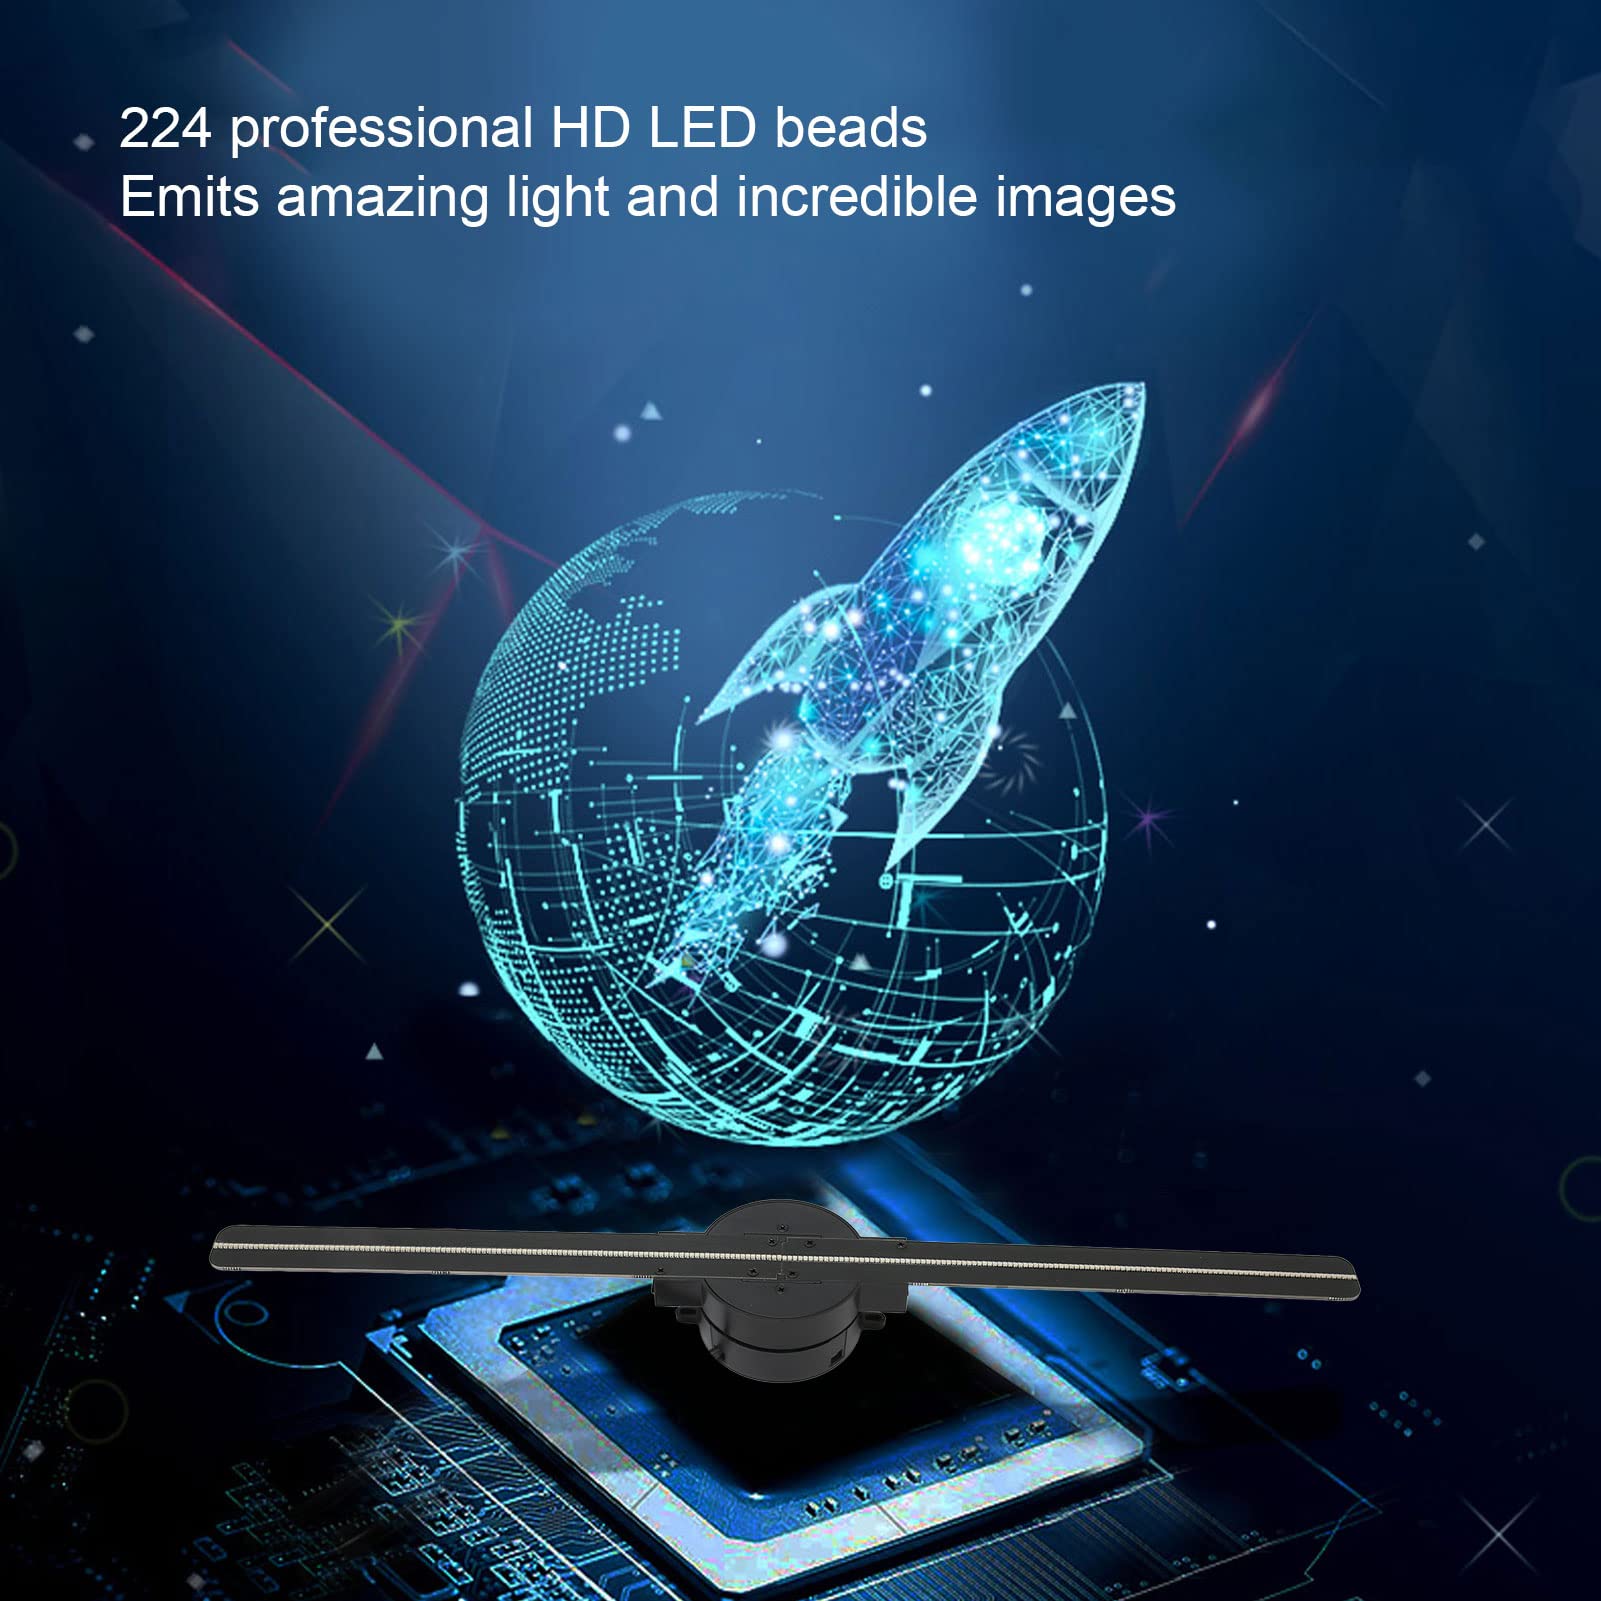 3D Hologram Fan, 16.5in WiFi 3D Hologram Projector Advertising Display With 224 LED Light Beads Holographic Video Projector for Business Store Signs, Bar, Casino, Party, Christmas